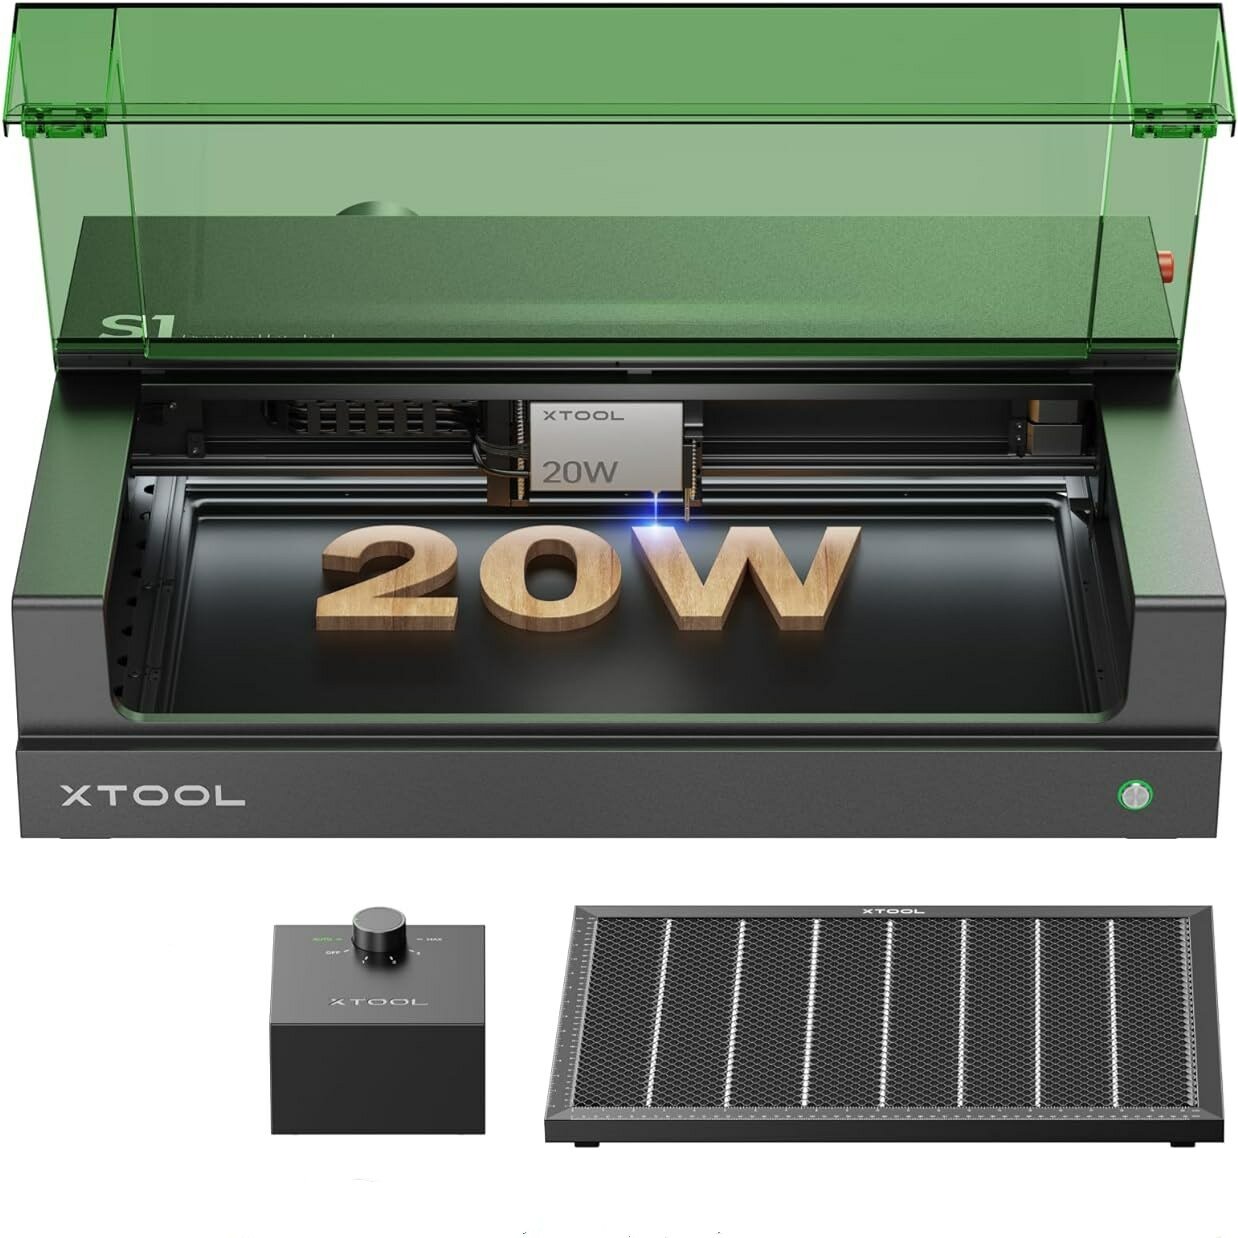 

xTool S1 20W Enclosed Diode Laser Cutting Machine DIY Engraver with Smart Air Assist and Honeycomb